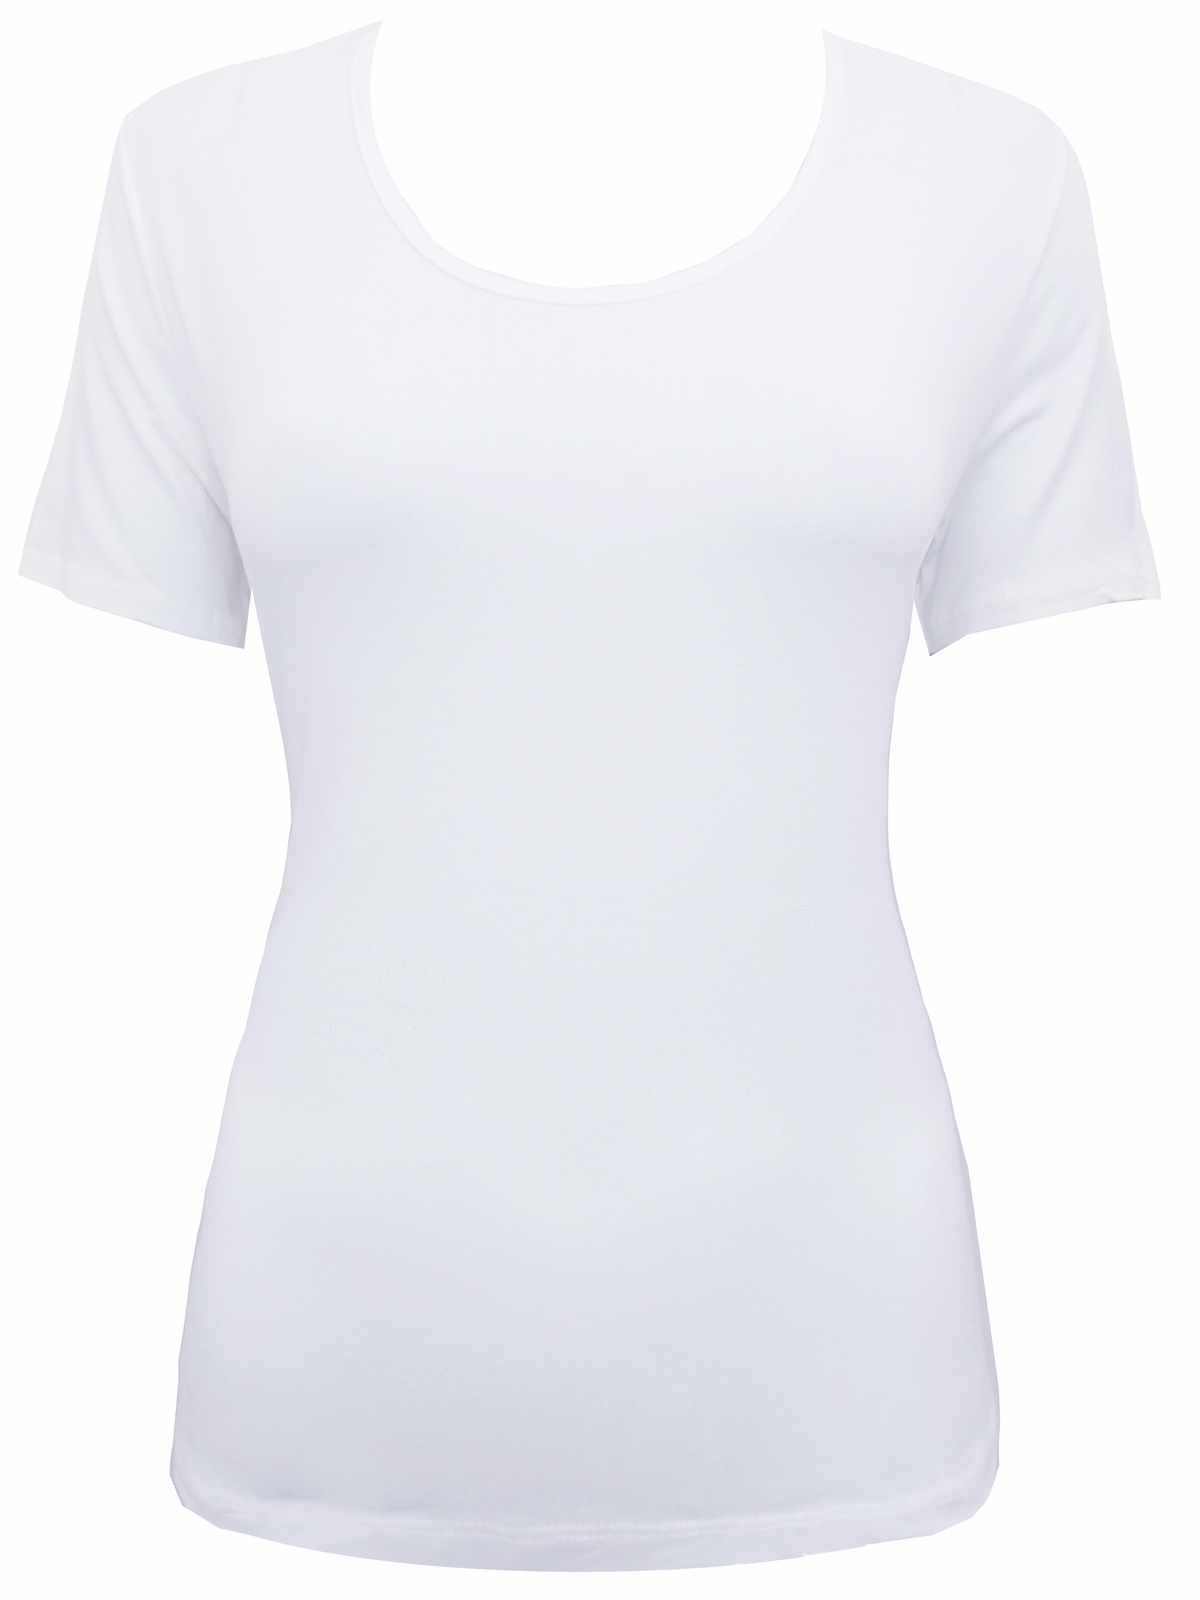 WHITE Short Sleeve Jersey Top - Size XSmall to XLarge